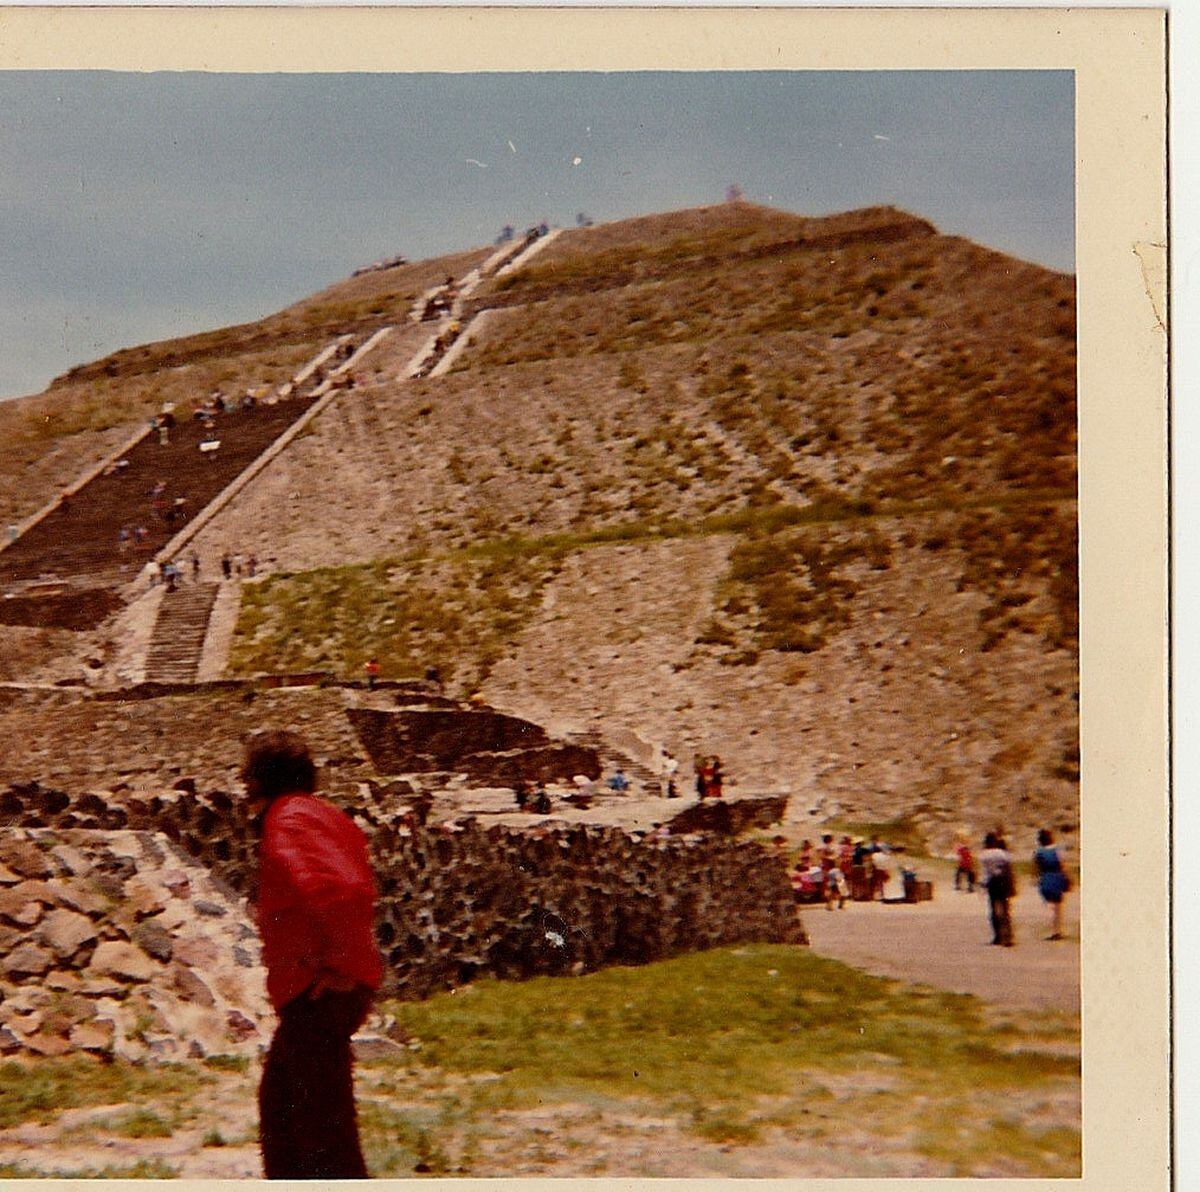 Seeing the pyramids of Teotihuacan